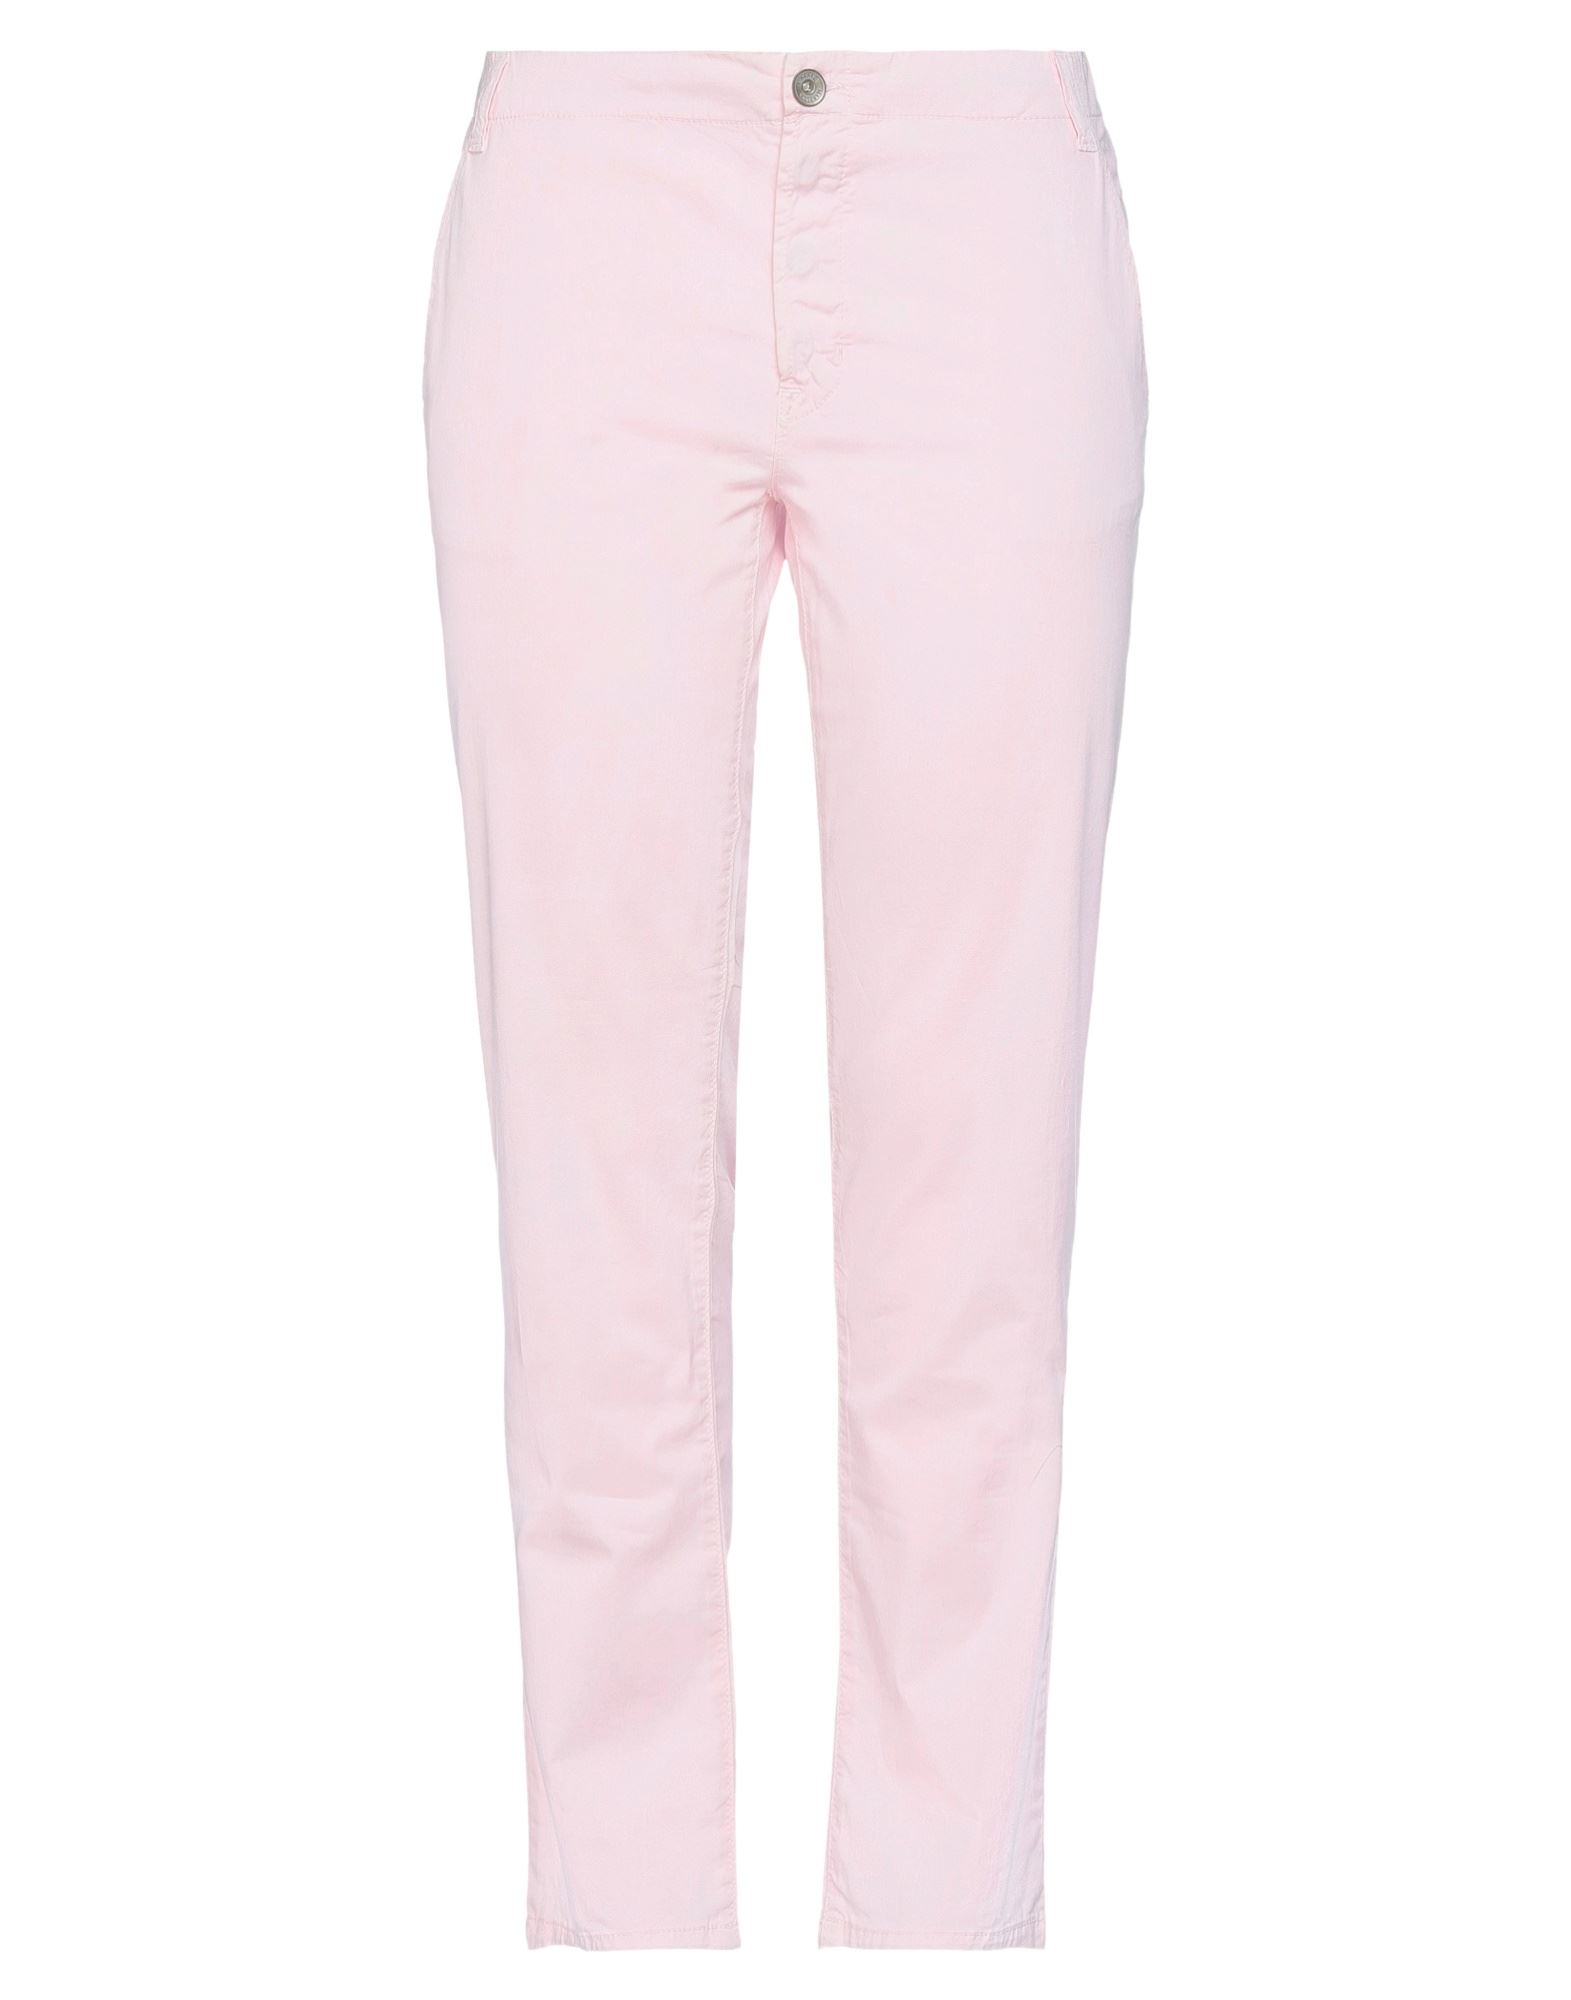 EMME by MARELLA Pants